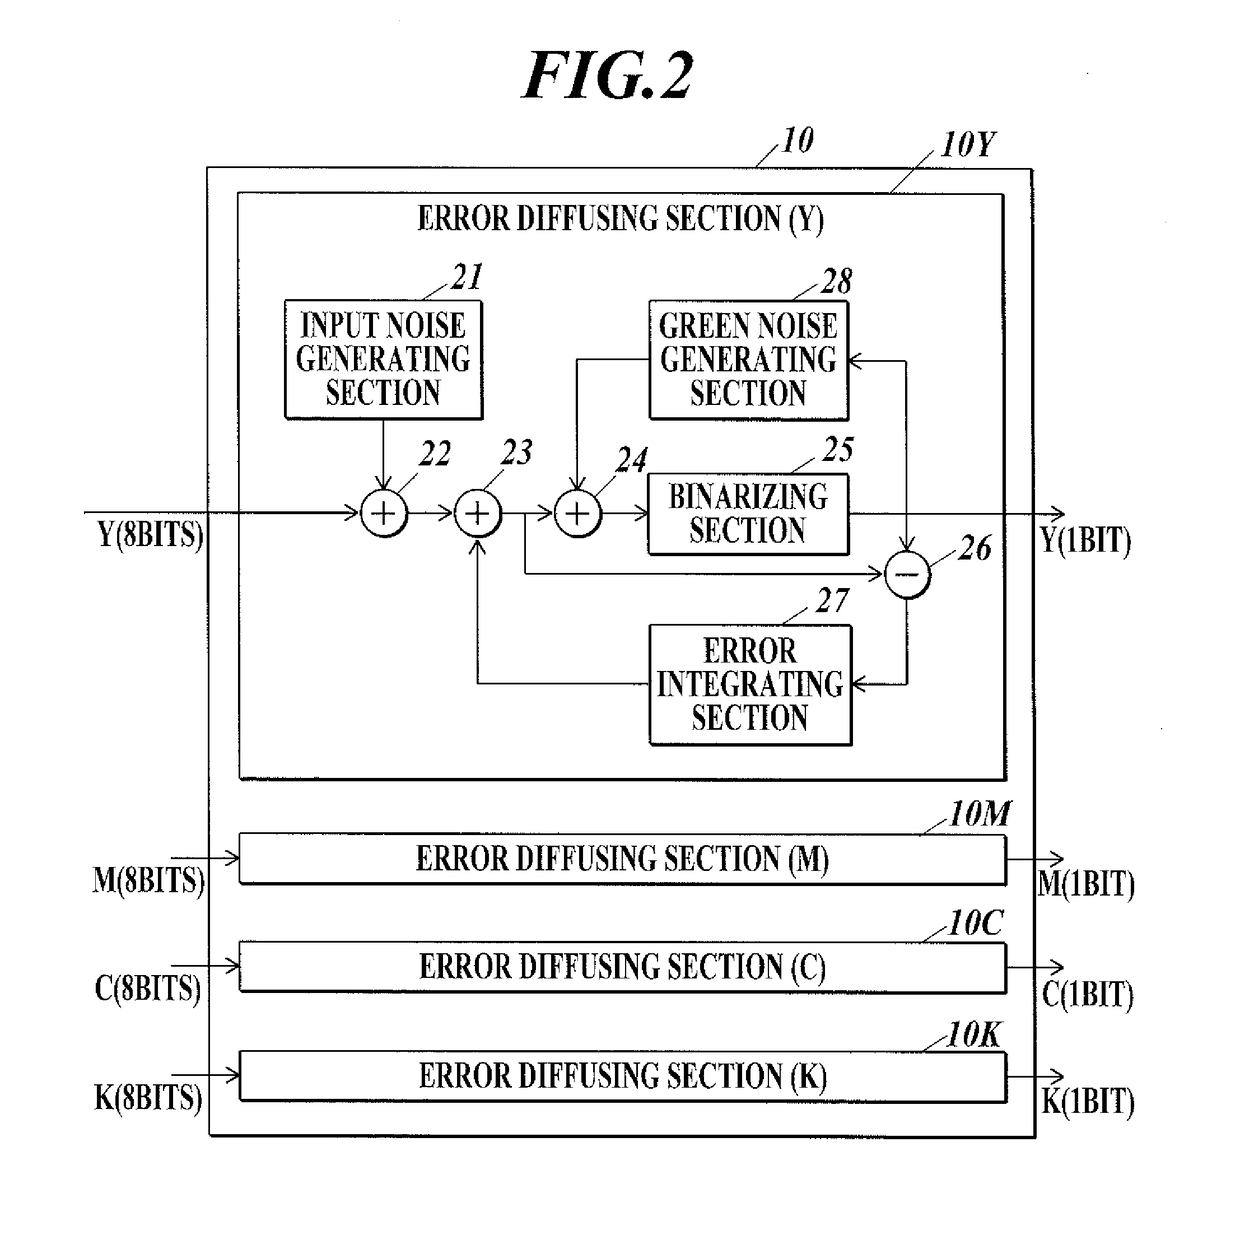 Image processing apparatus, control method, and computer-readable recording medium configured to perform error diffusion process having and adder to add an error intergrated value diffused to the target pixel, the green noise and the predetermined noise, to the pixel value of the target pixel